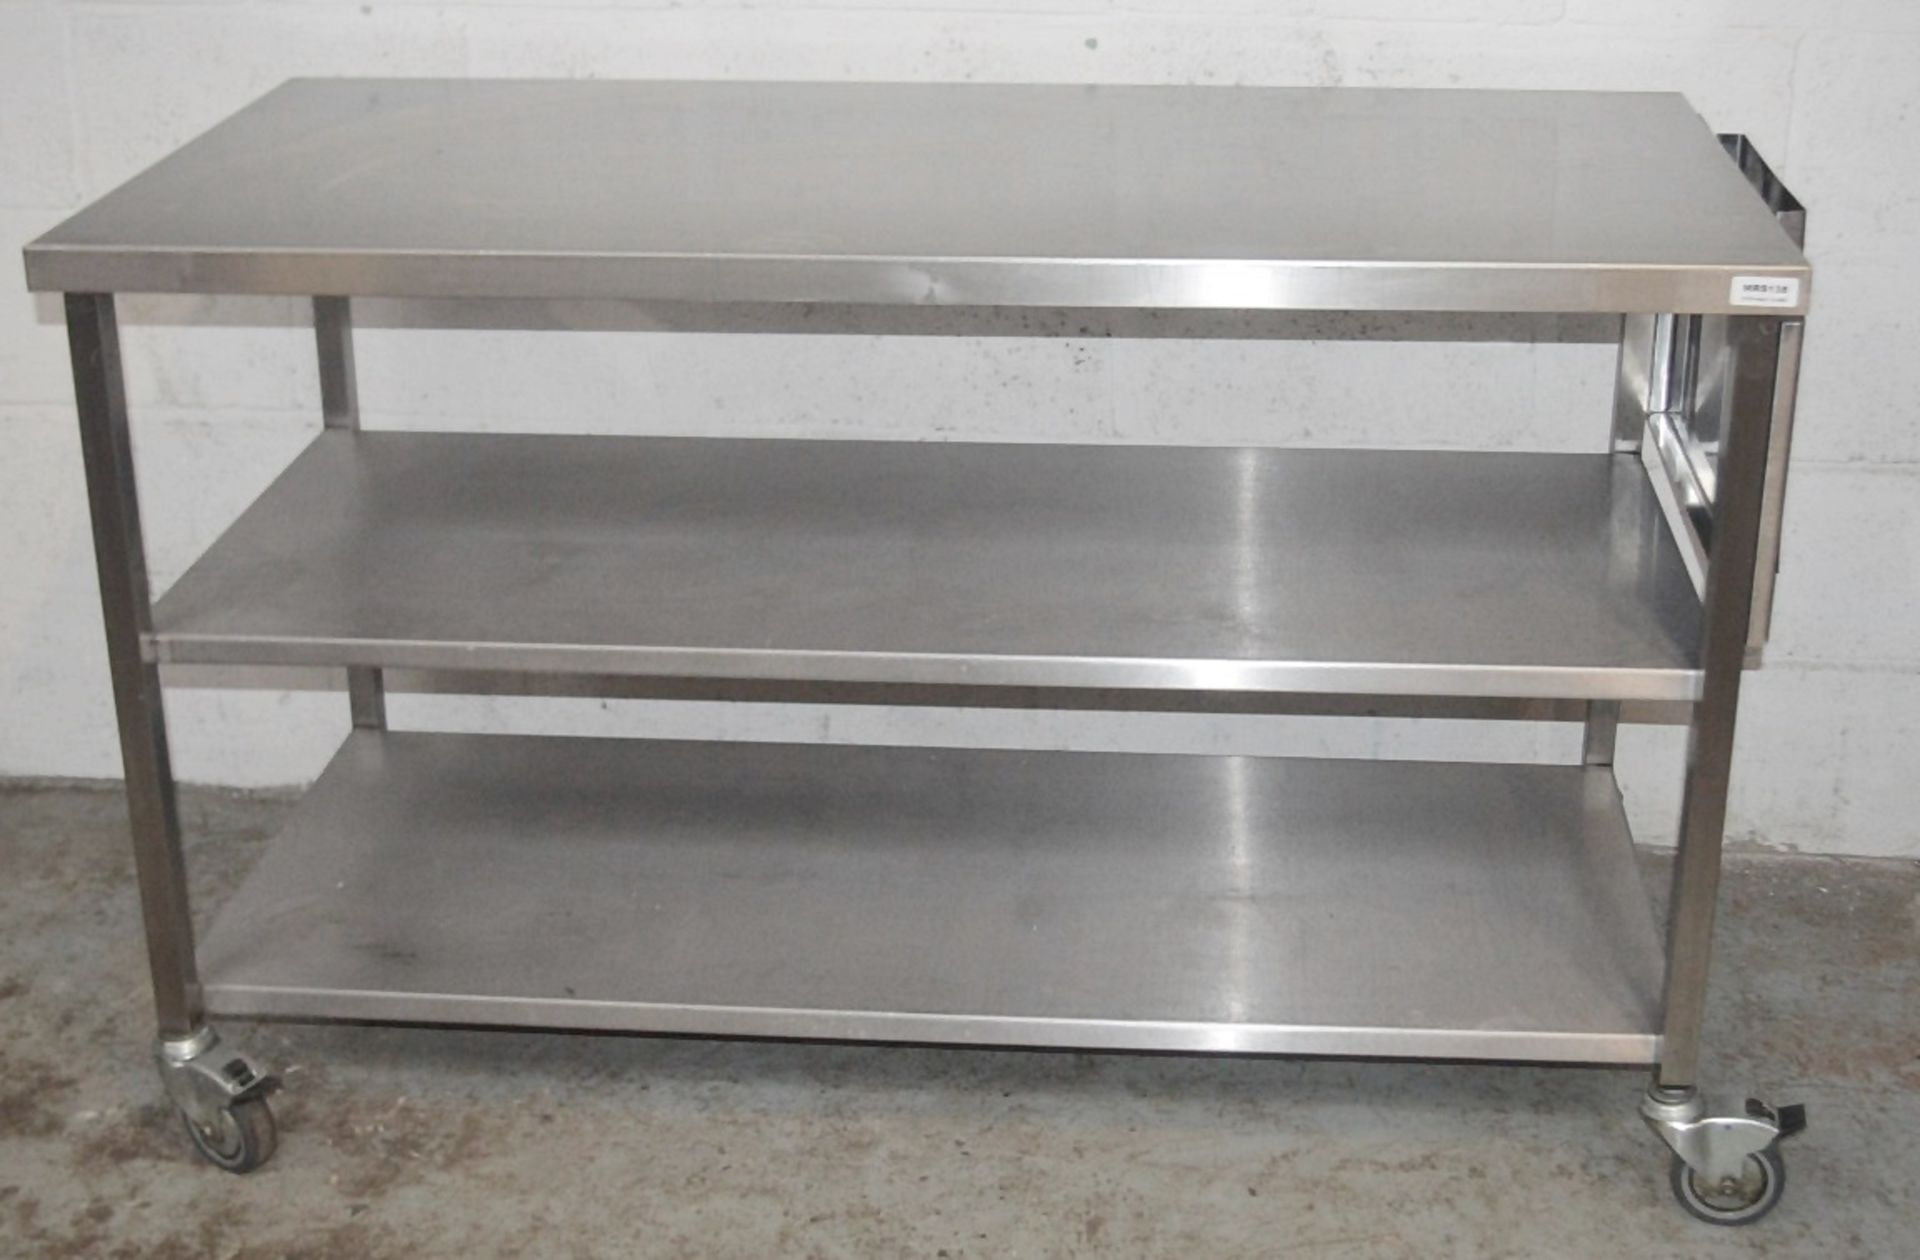 1 x Stainless Steel Commercial Kitchen Prep Trolley - Dimensions: H88 x W143 x D67cm - Very Recently